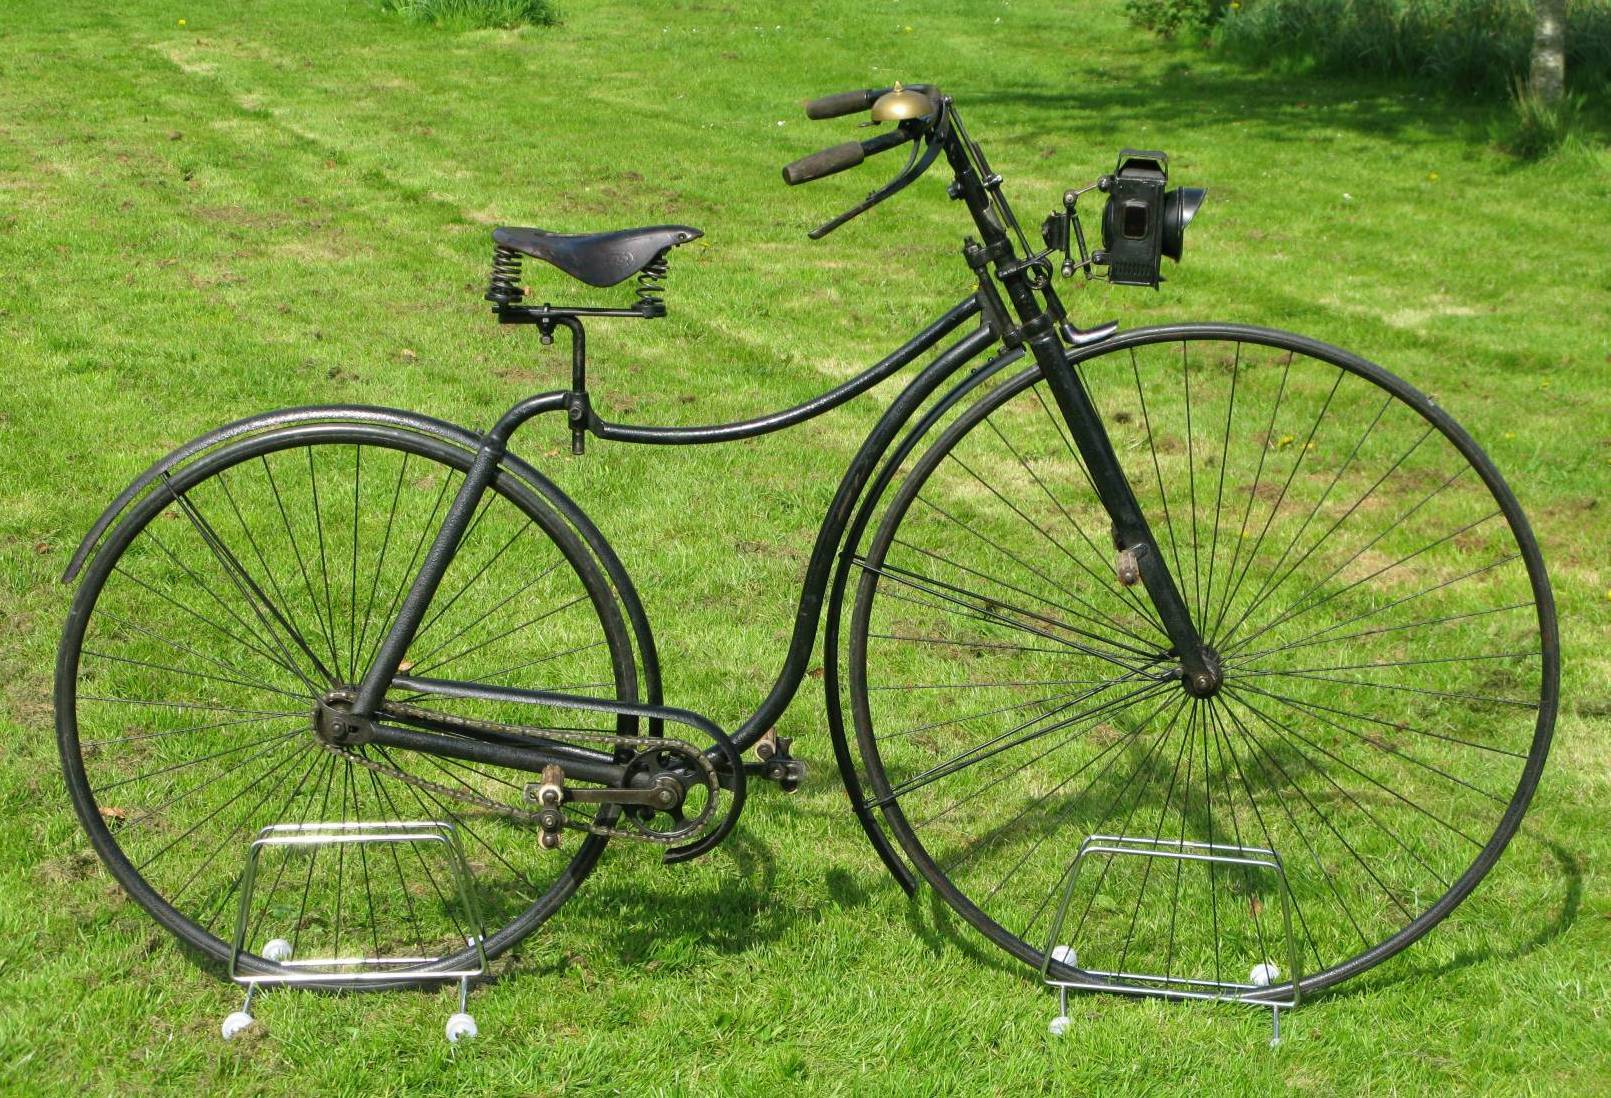 The Rover safety bicycle - Rover